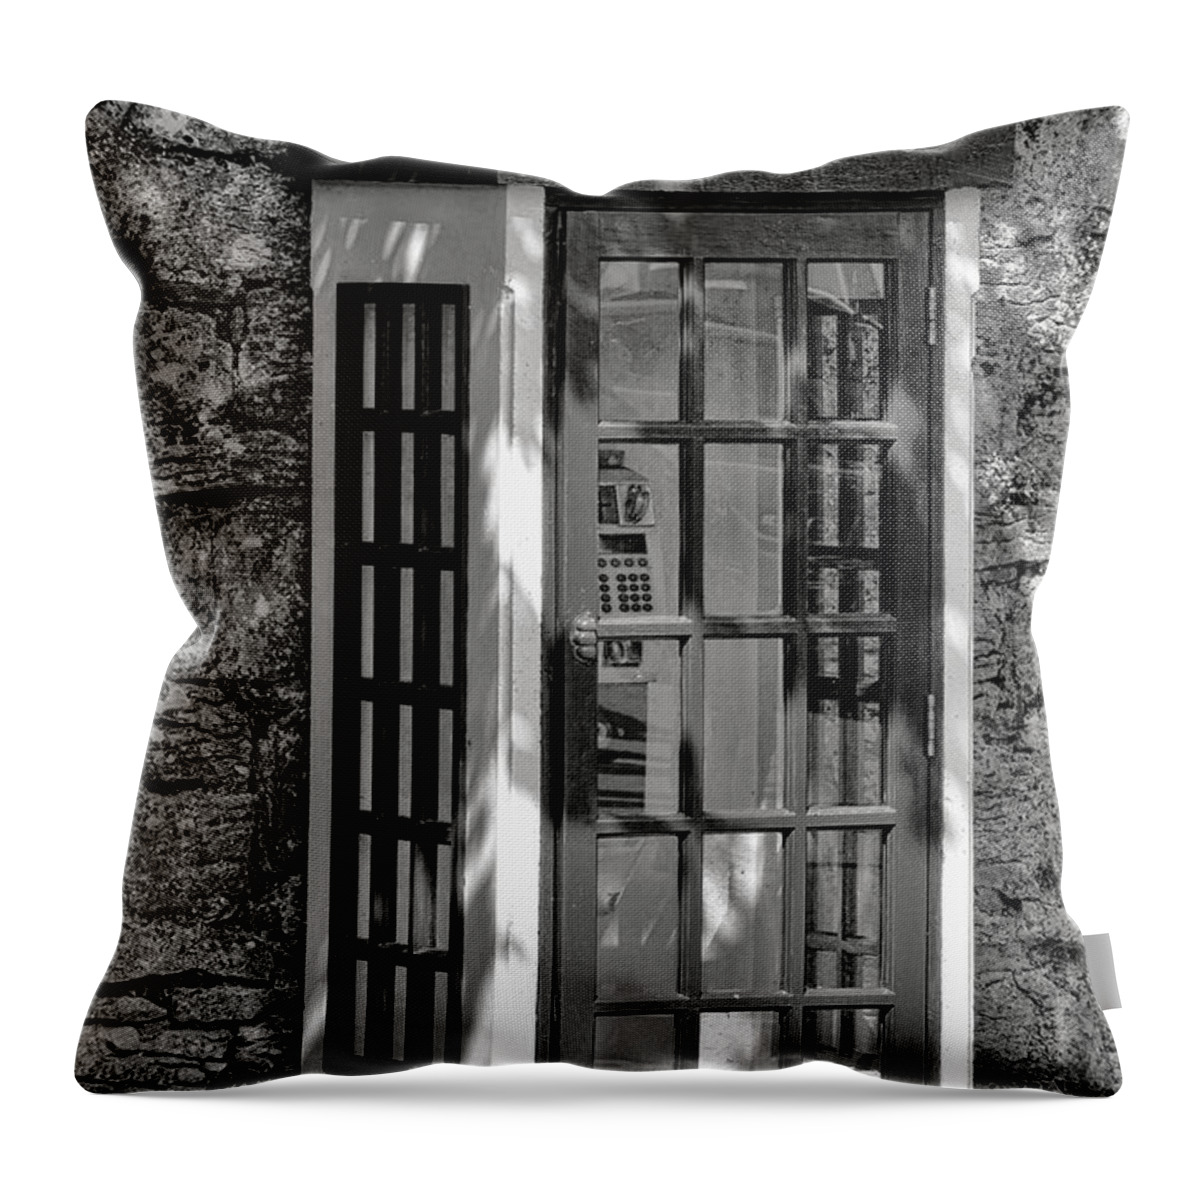 Ireland Throw Pillow featuring the photograph Telefon by Olivier Le Queinec